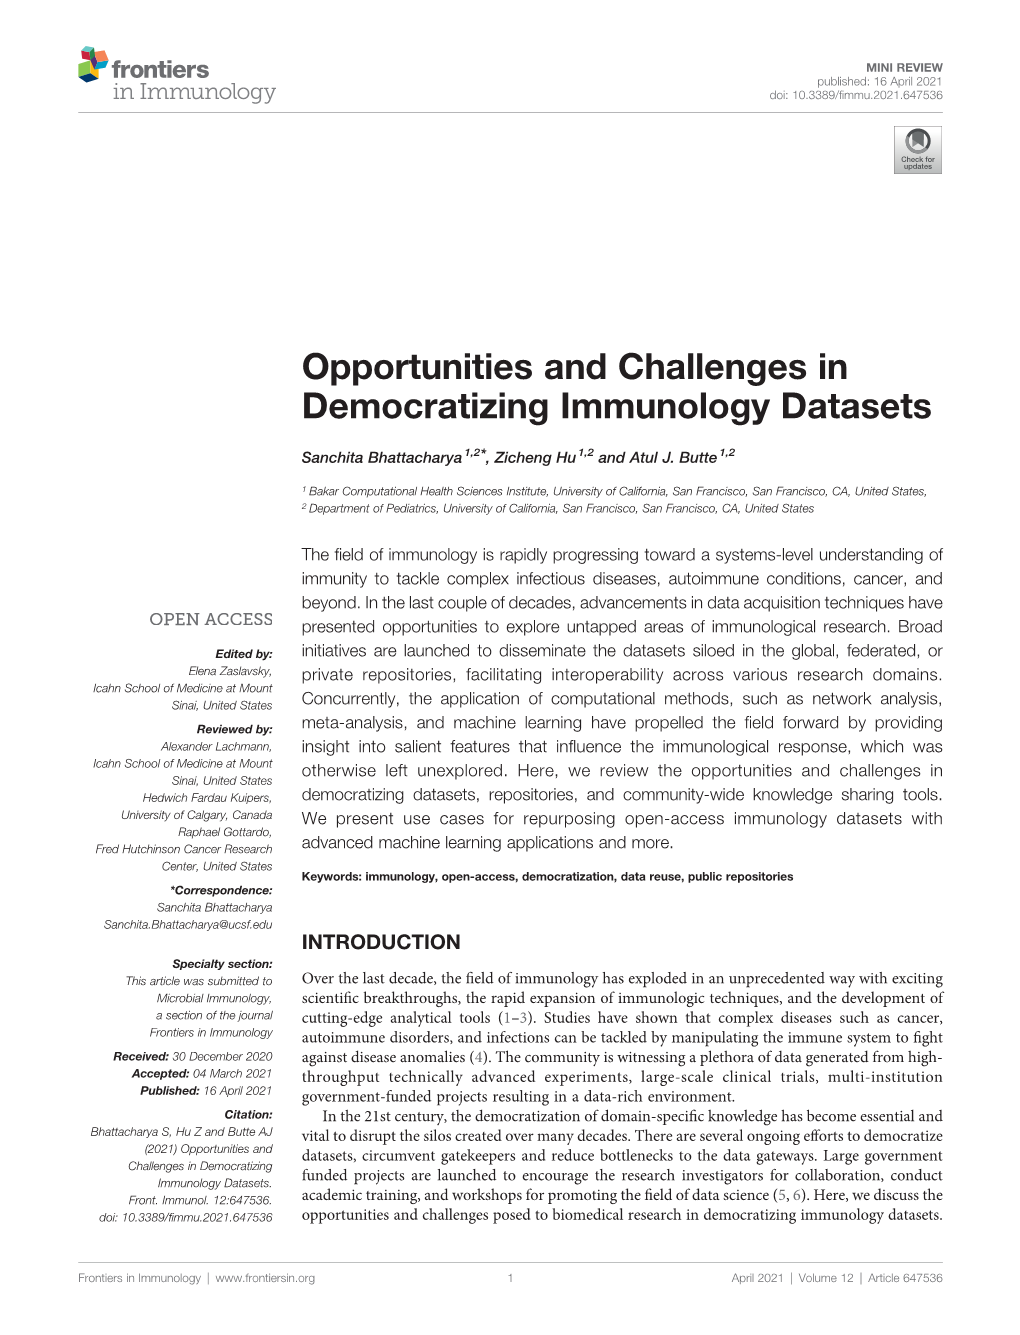 Opportunities and Challenges in Democratizing Immunology Datasets